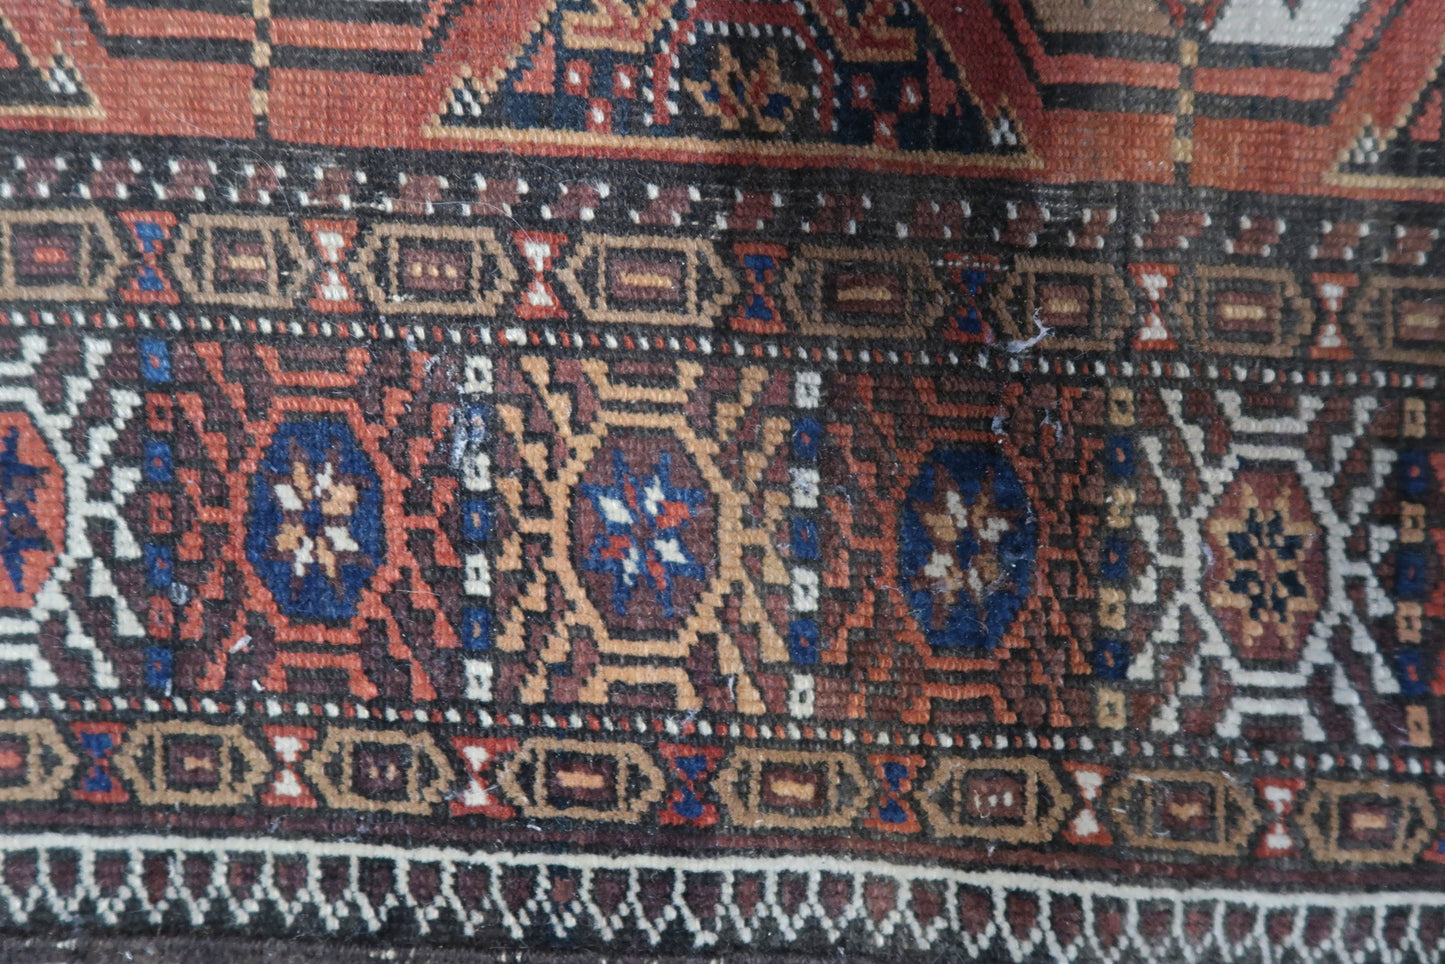 Detailed View of Woven Wool Material on Vintage Afghan Baluch Rug